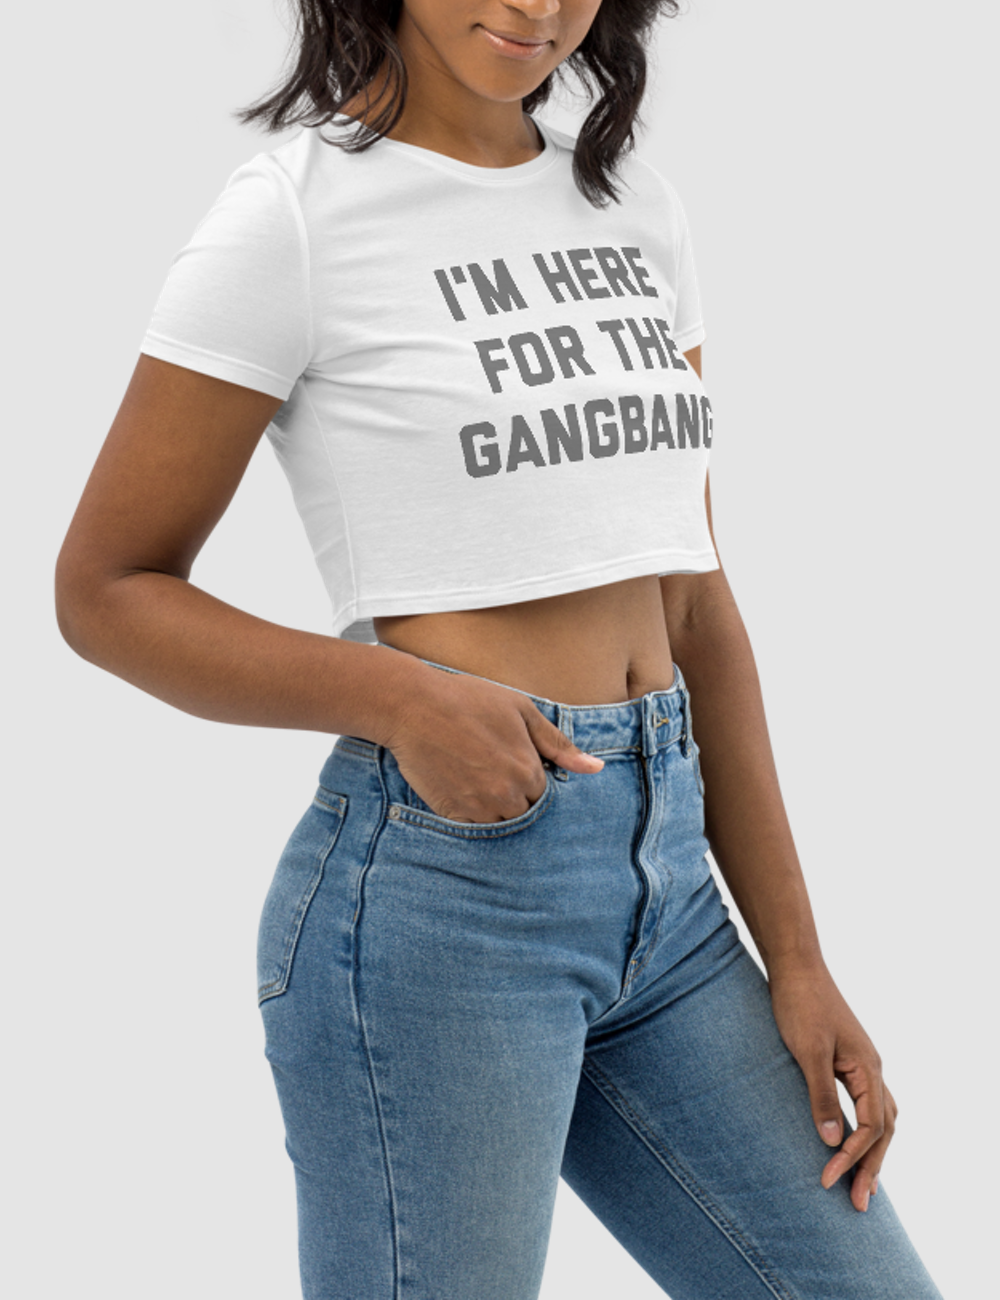 I'm Here For The Gangbang Women's Fitted Crop Top T-Shirt OniTakai